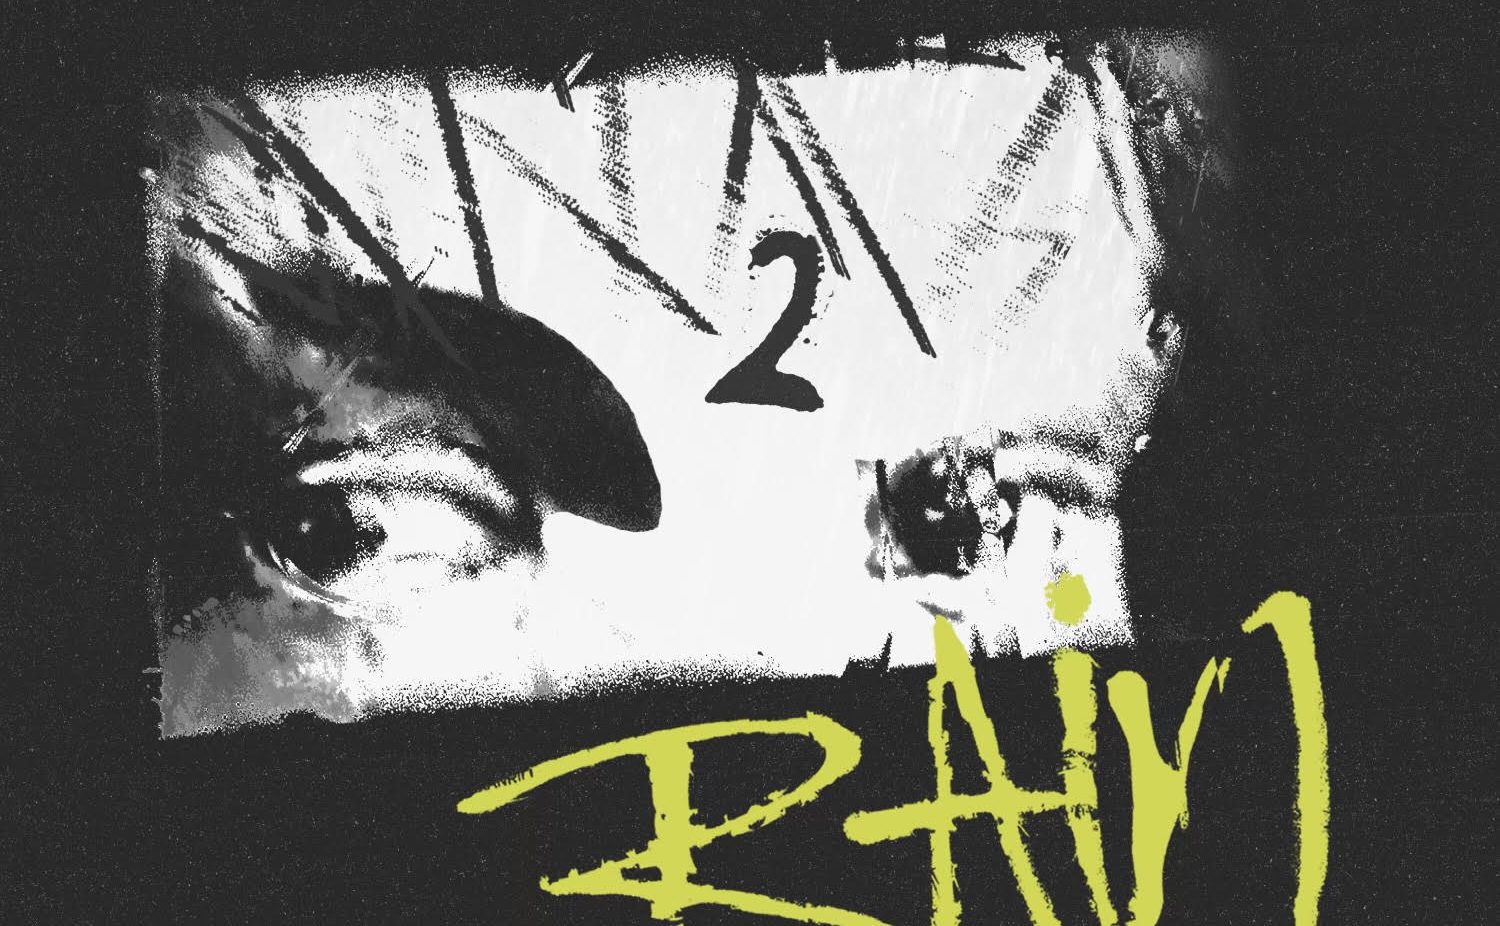 A Kentucky Sensation, 2KBaby Drops "Rain" And Officially Announces His Flood Of New Music